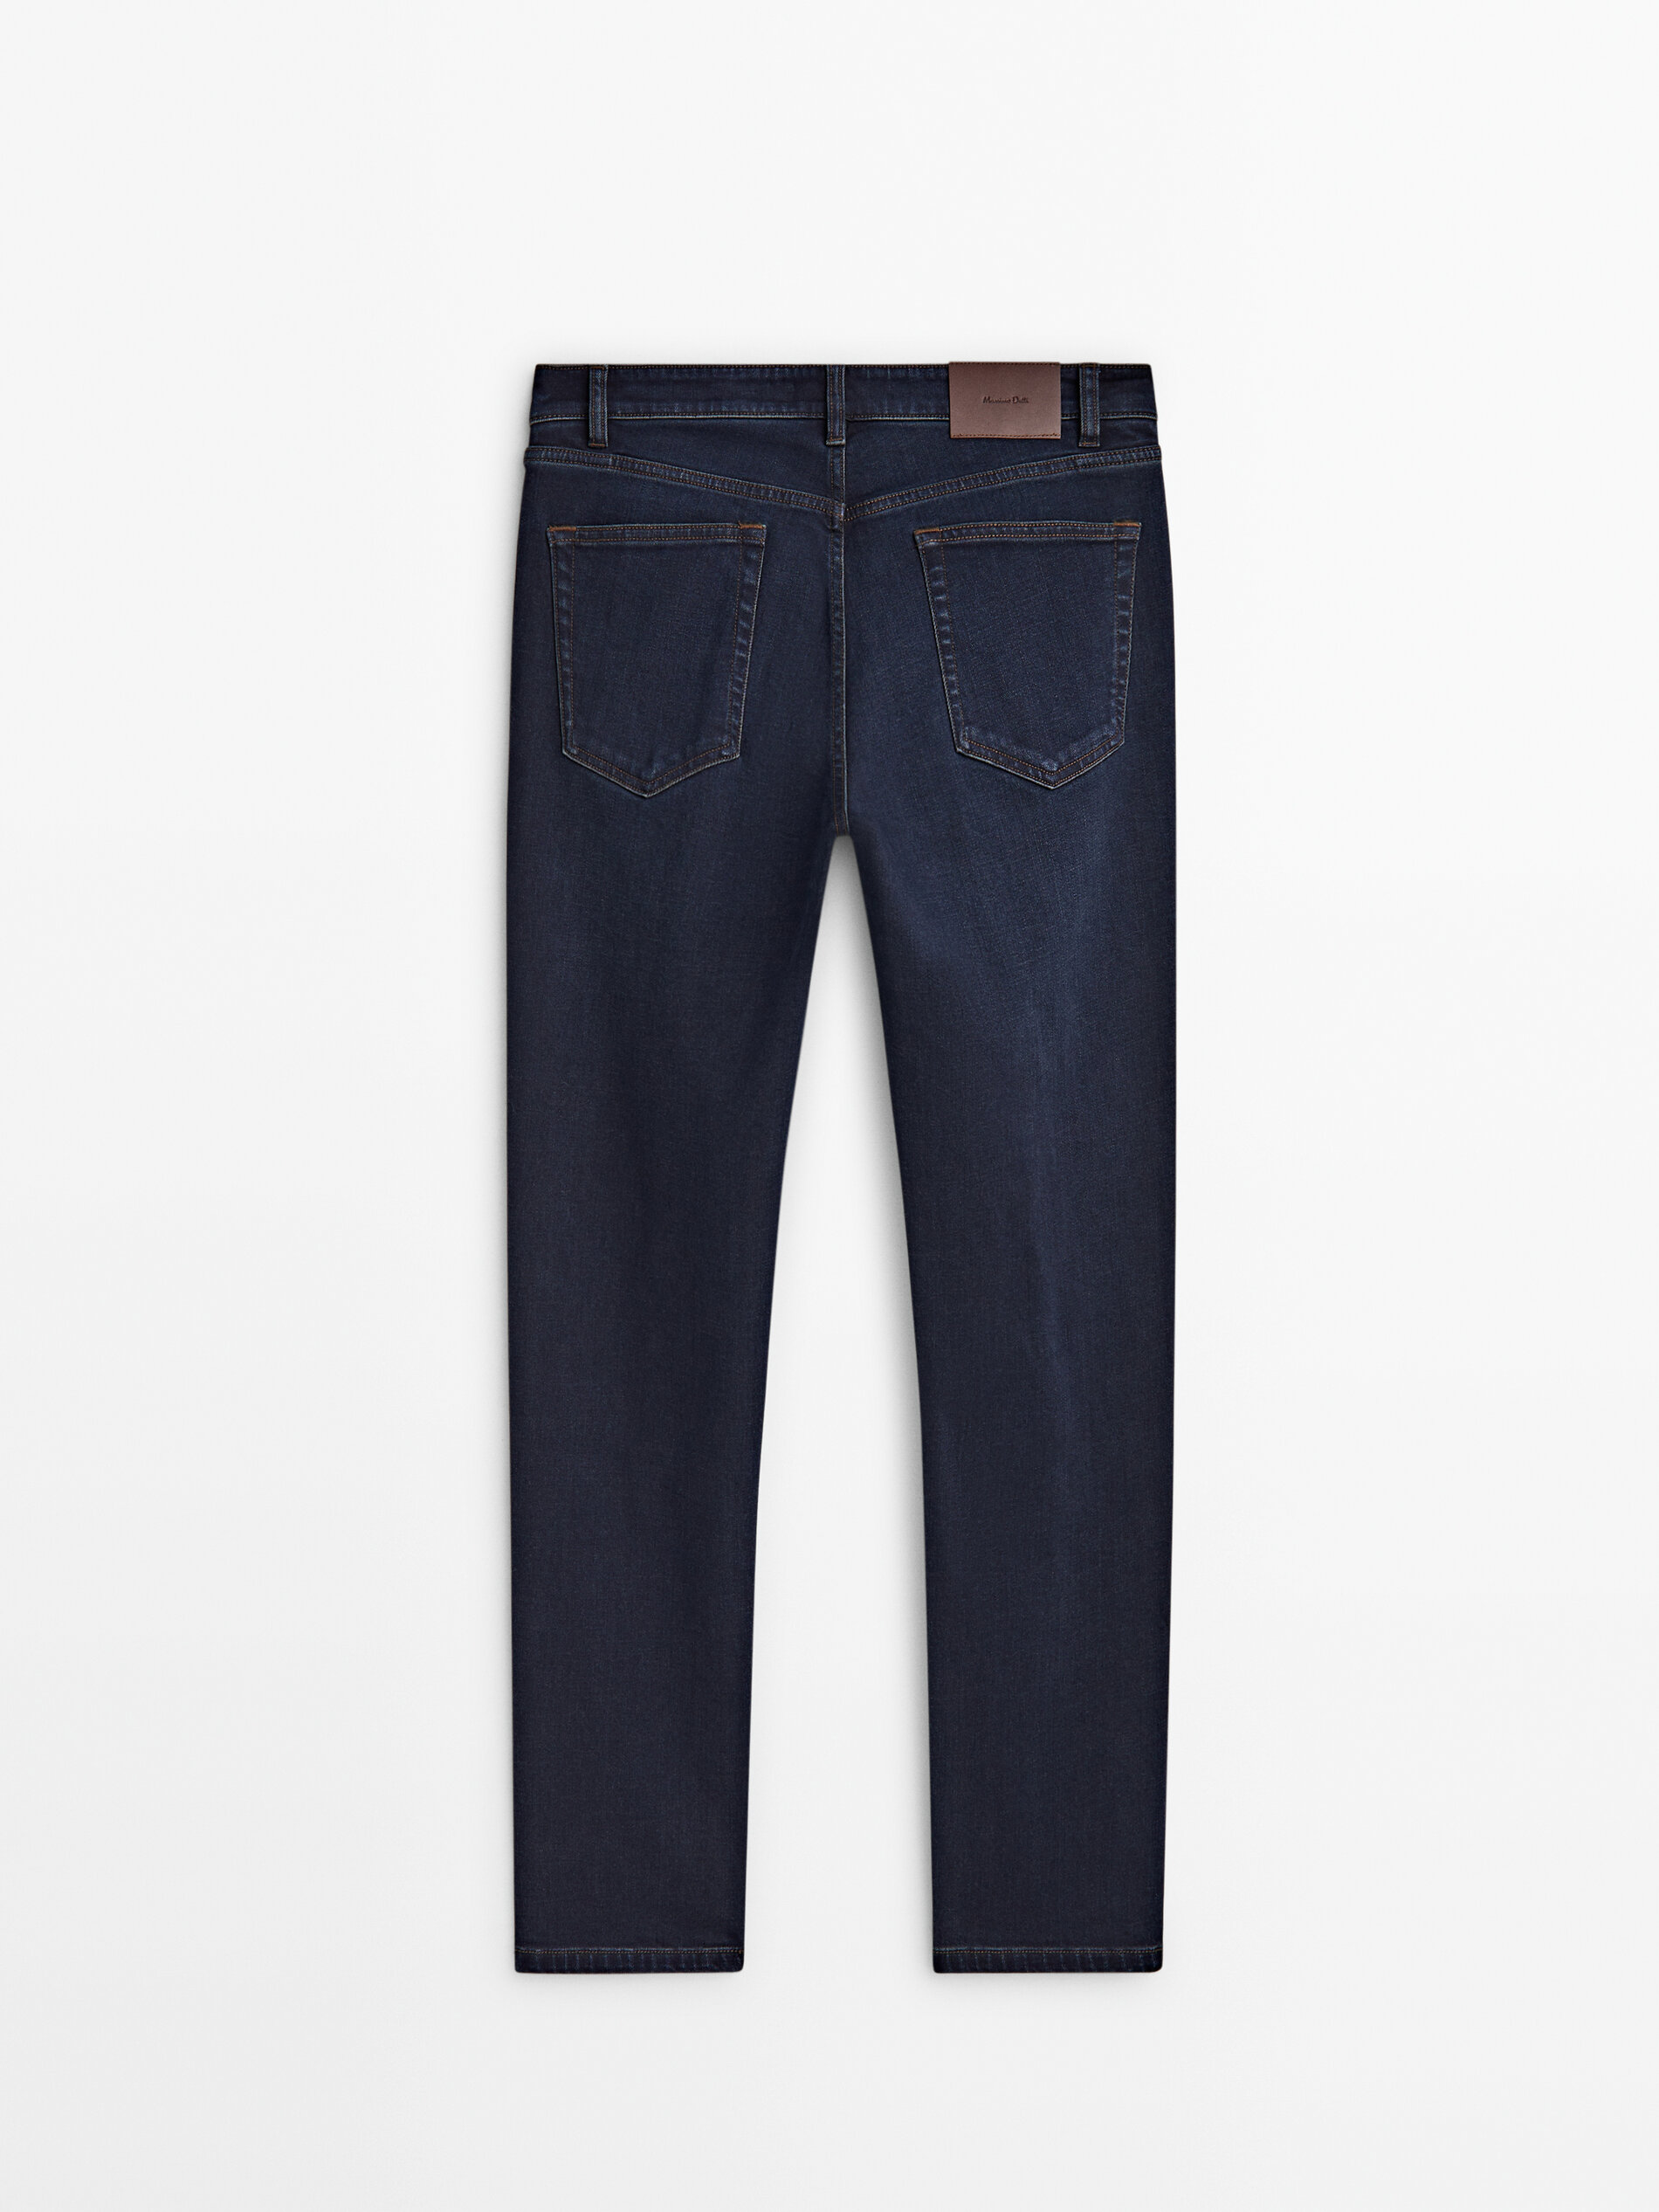 Jeans brushed rinse wash relaxed fit